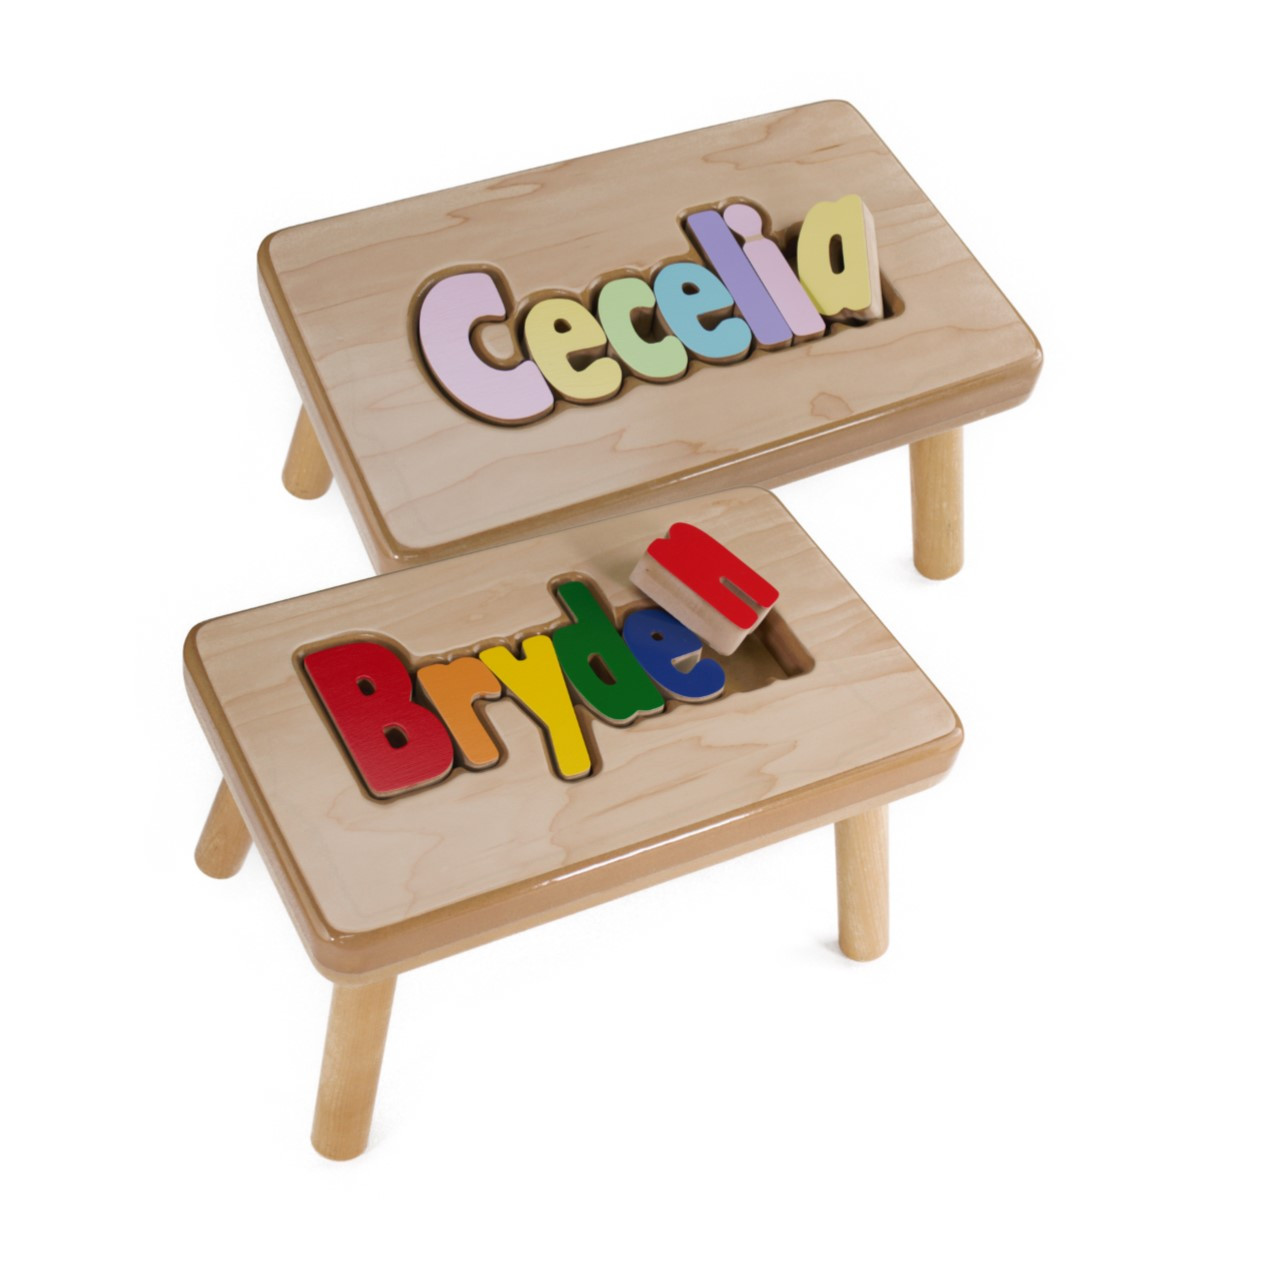 Personalized Puzzle Stool - Tims unique products